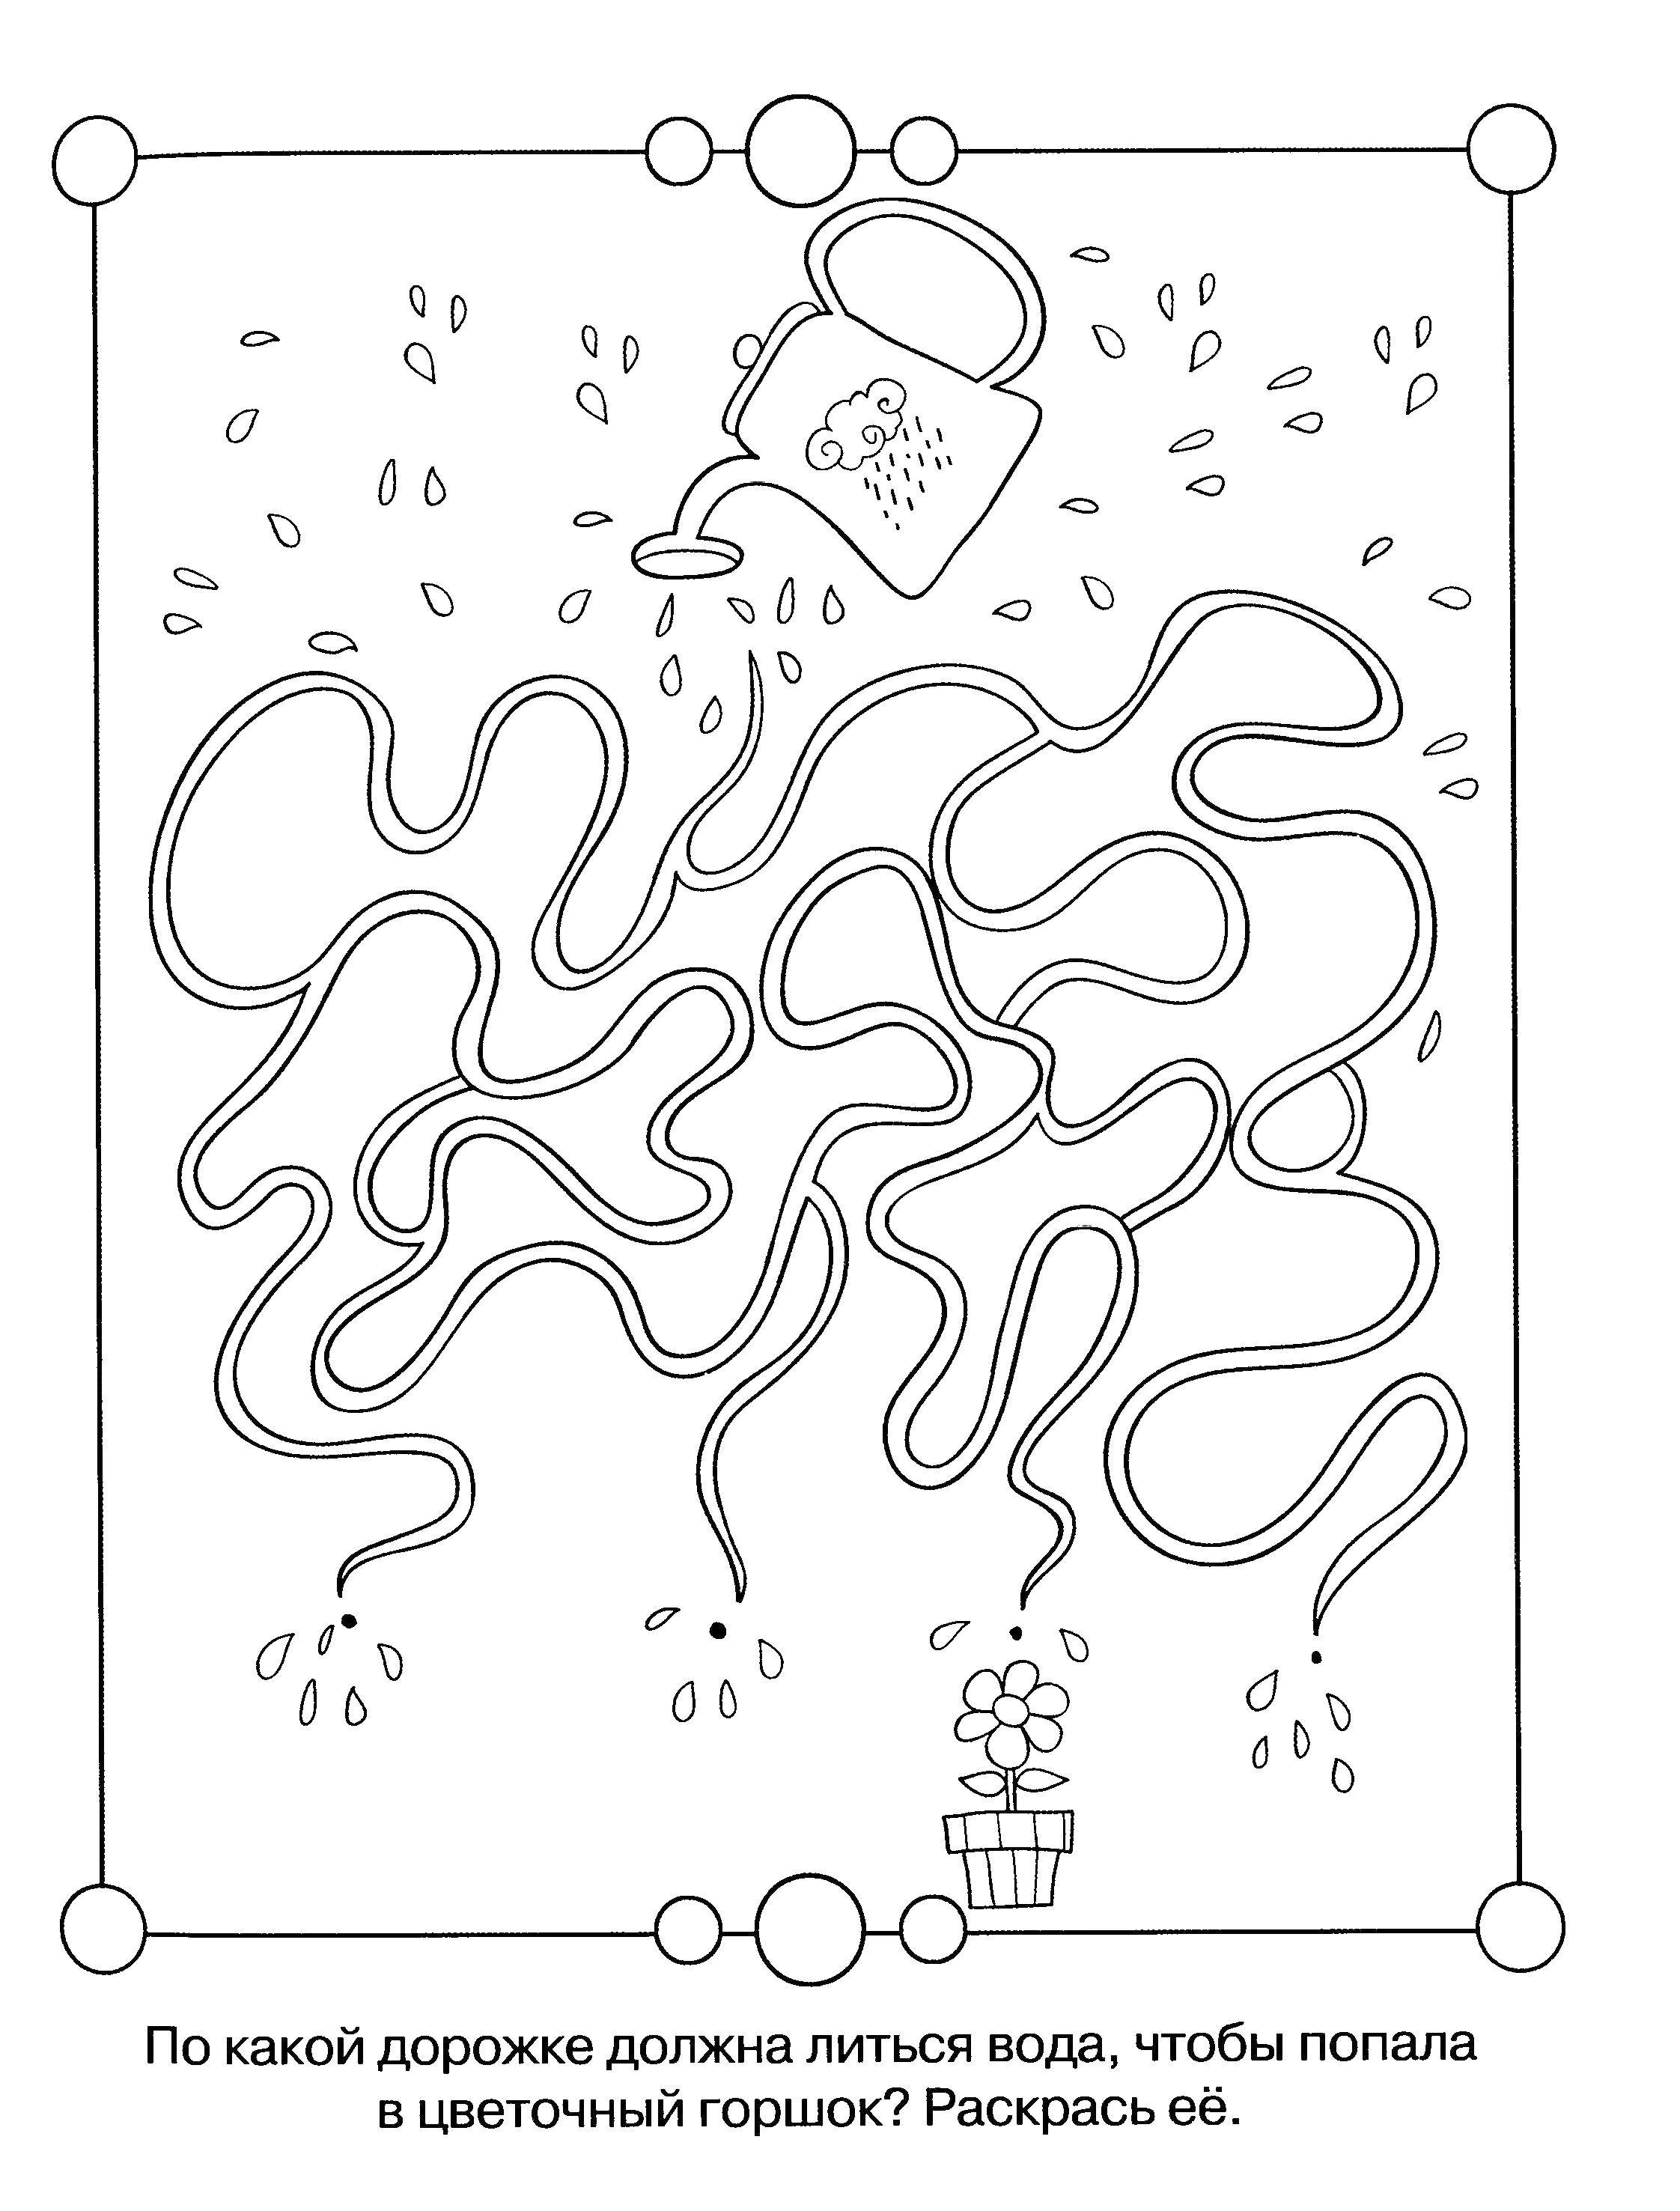 Coloring Select the track for water. Category riddles for kids. Tags:  Teaching coloring, logic.